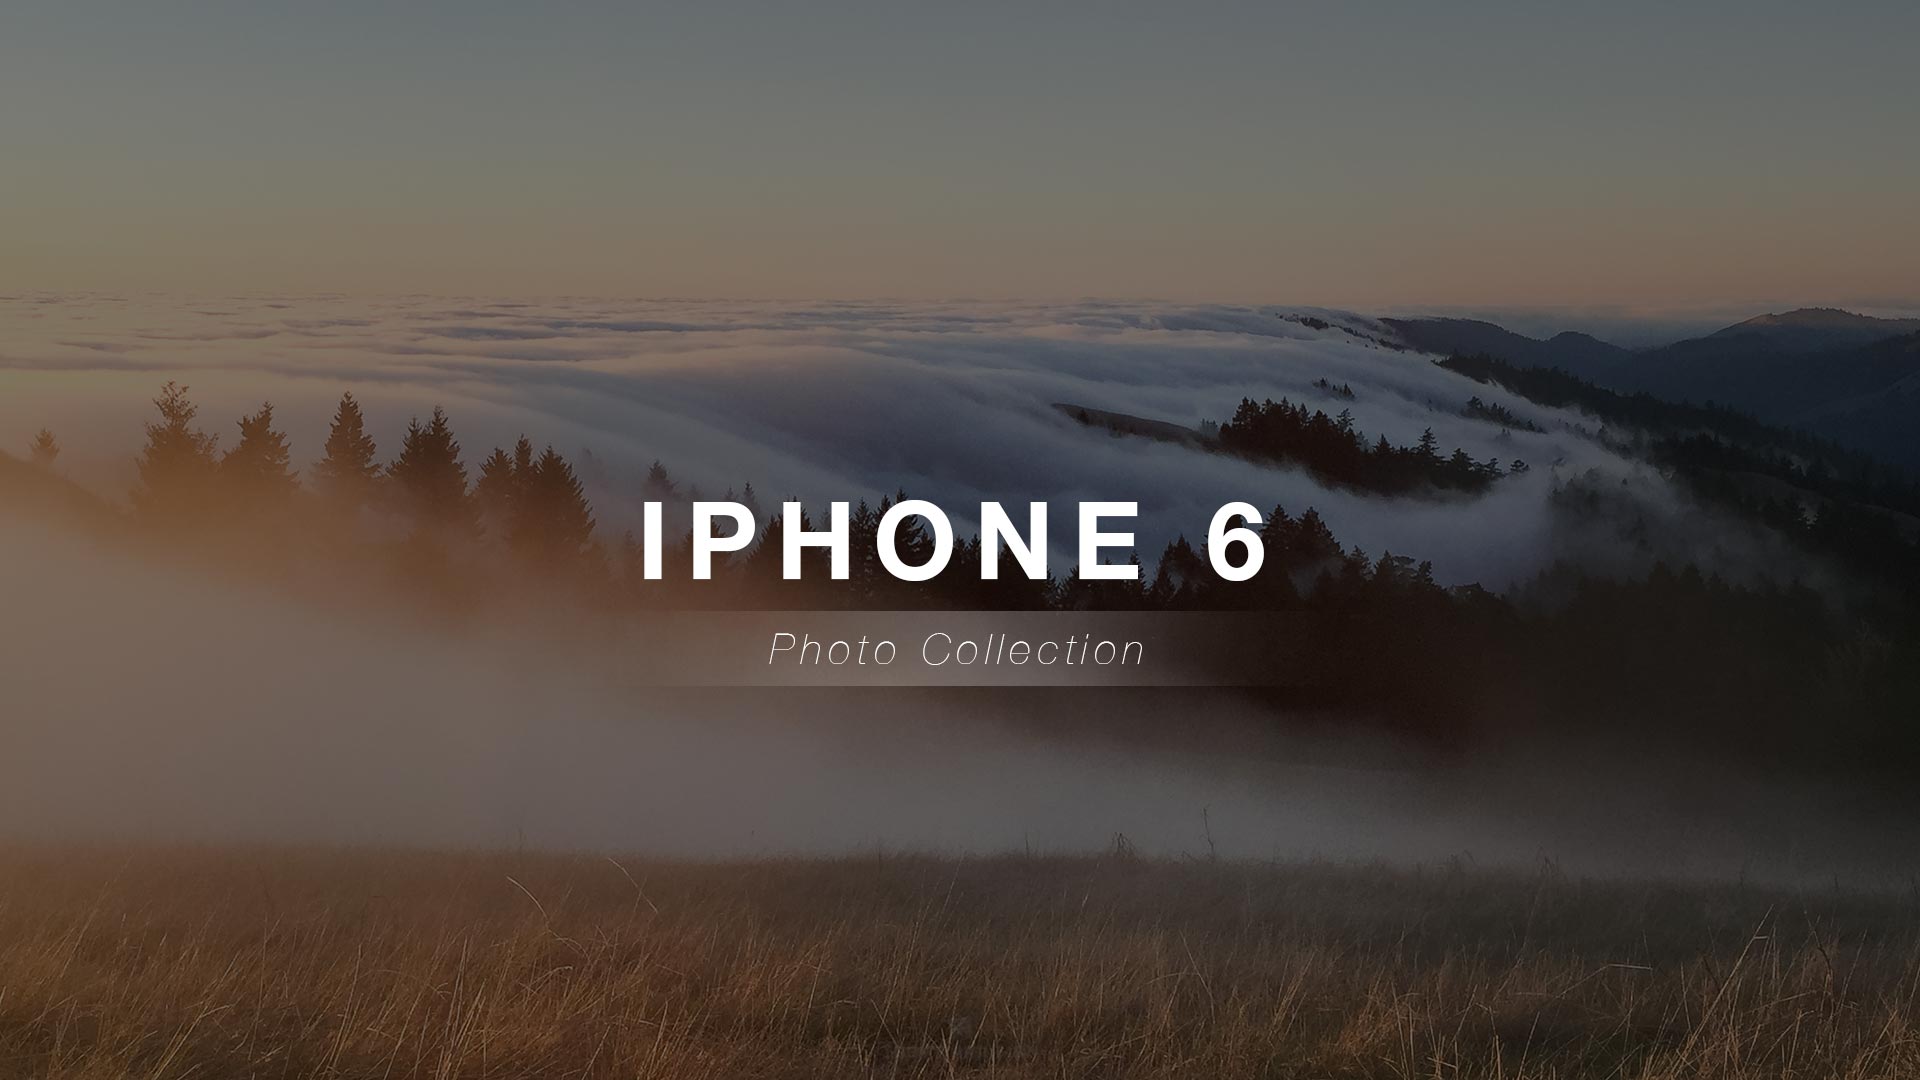 iPhone 6 – Photography Collection